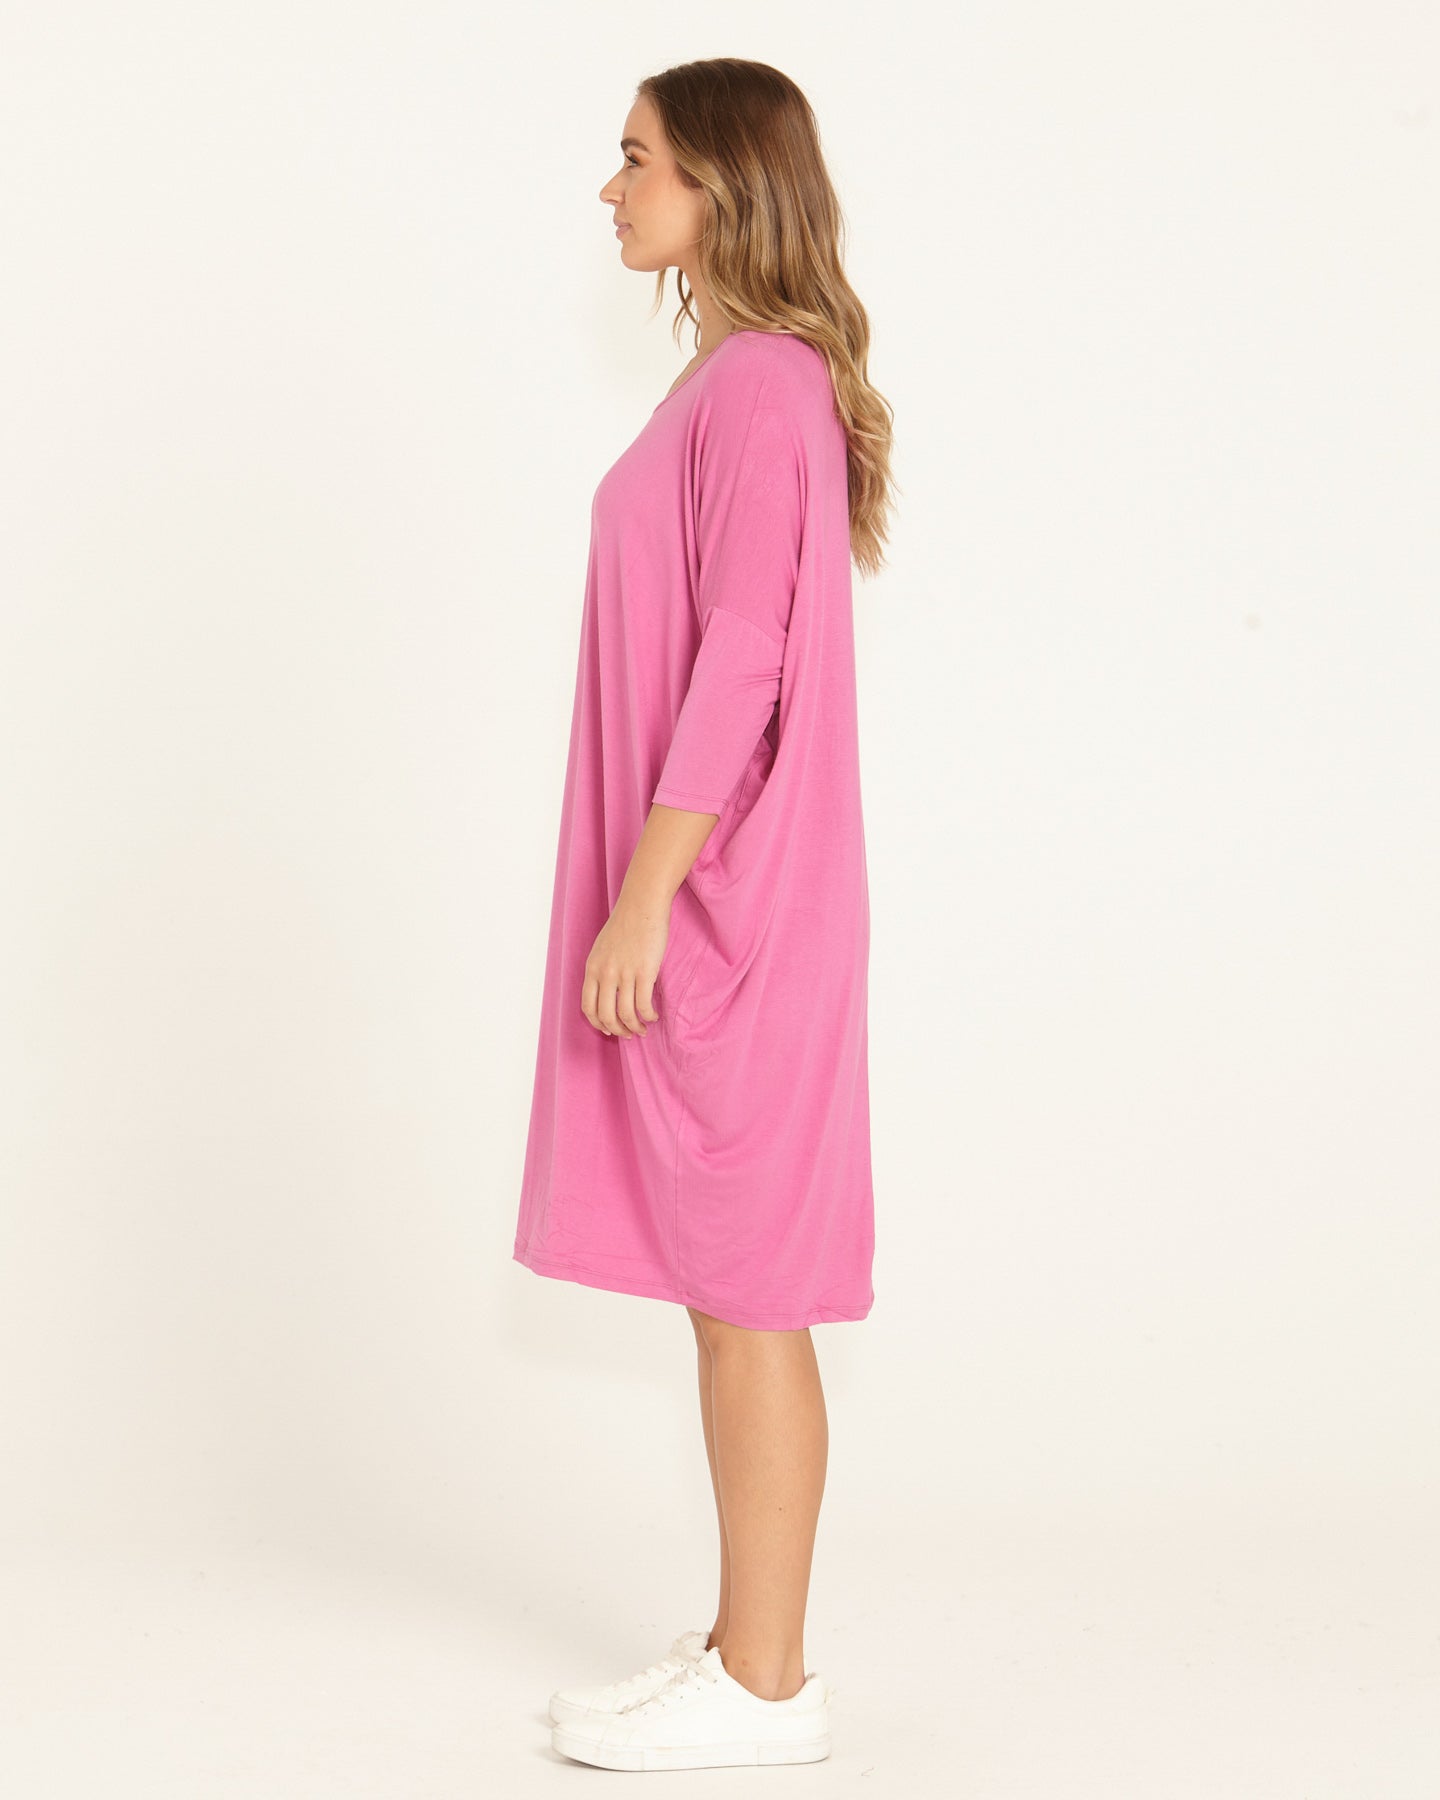 Lucia Stretchy 3/4 Sleeve T-Shirt Dress - Winter Pink